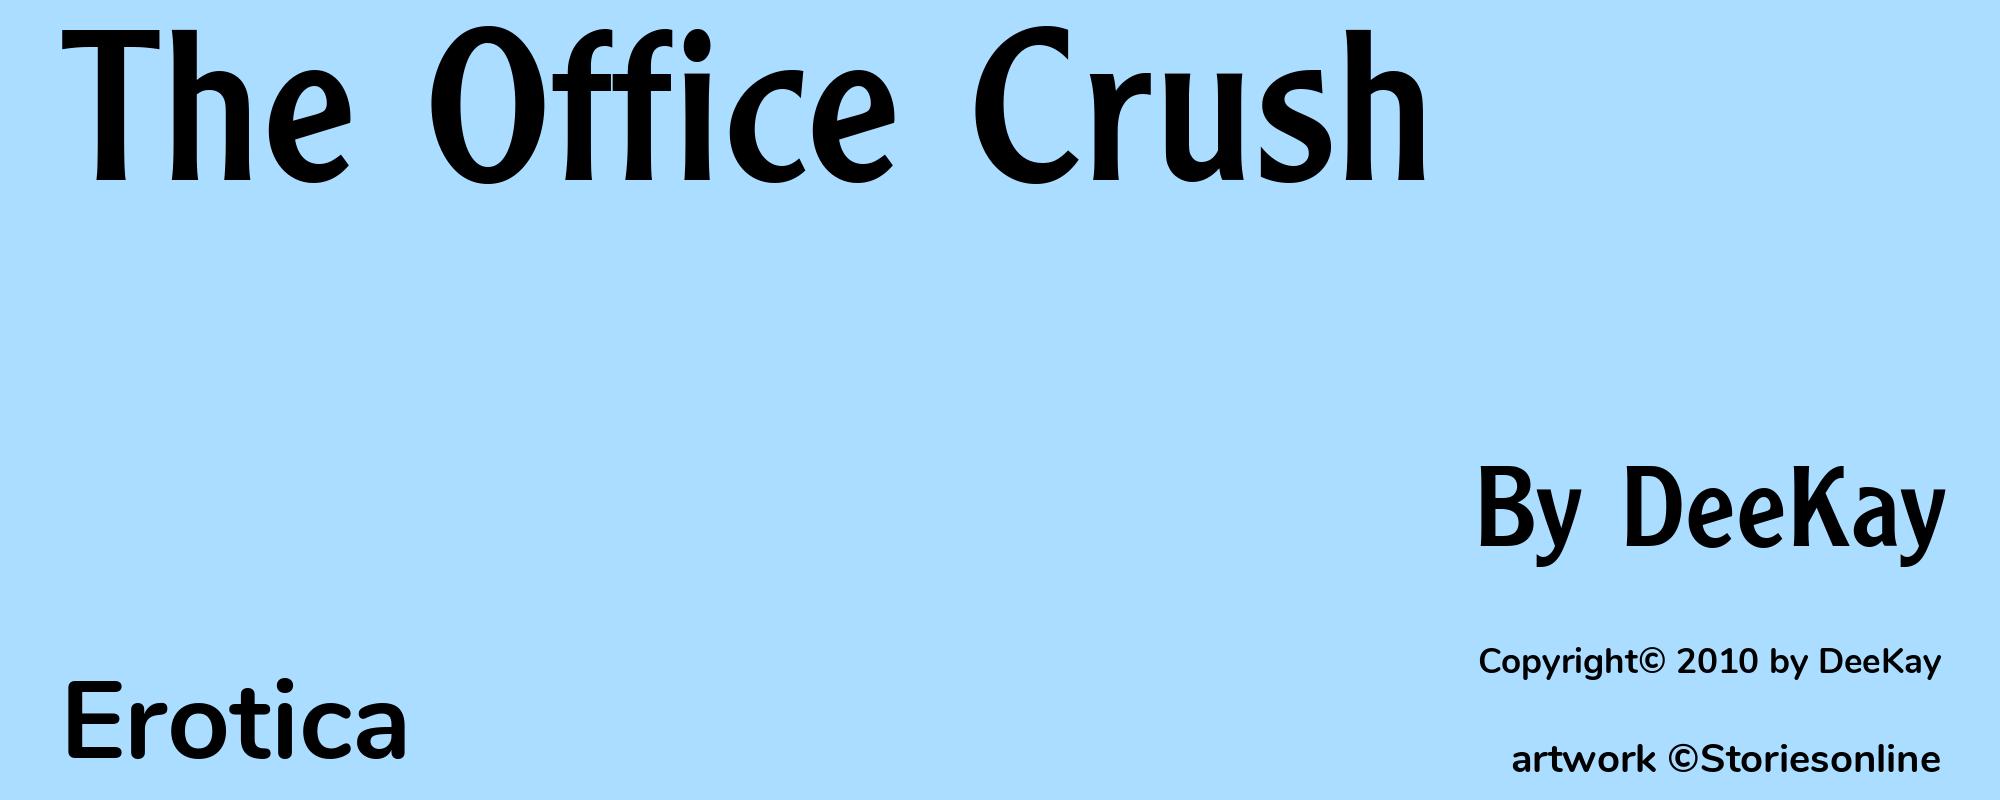 The Office Crush - Cover